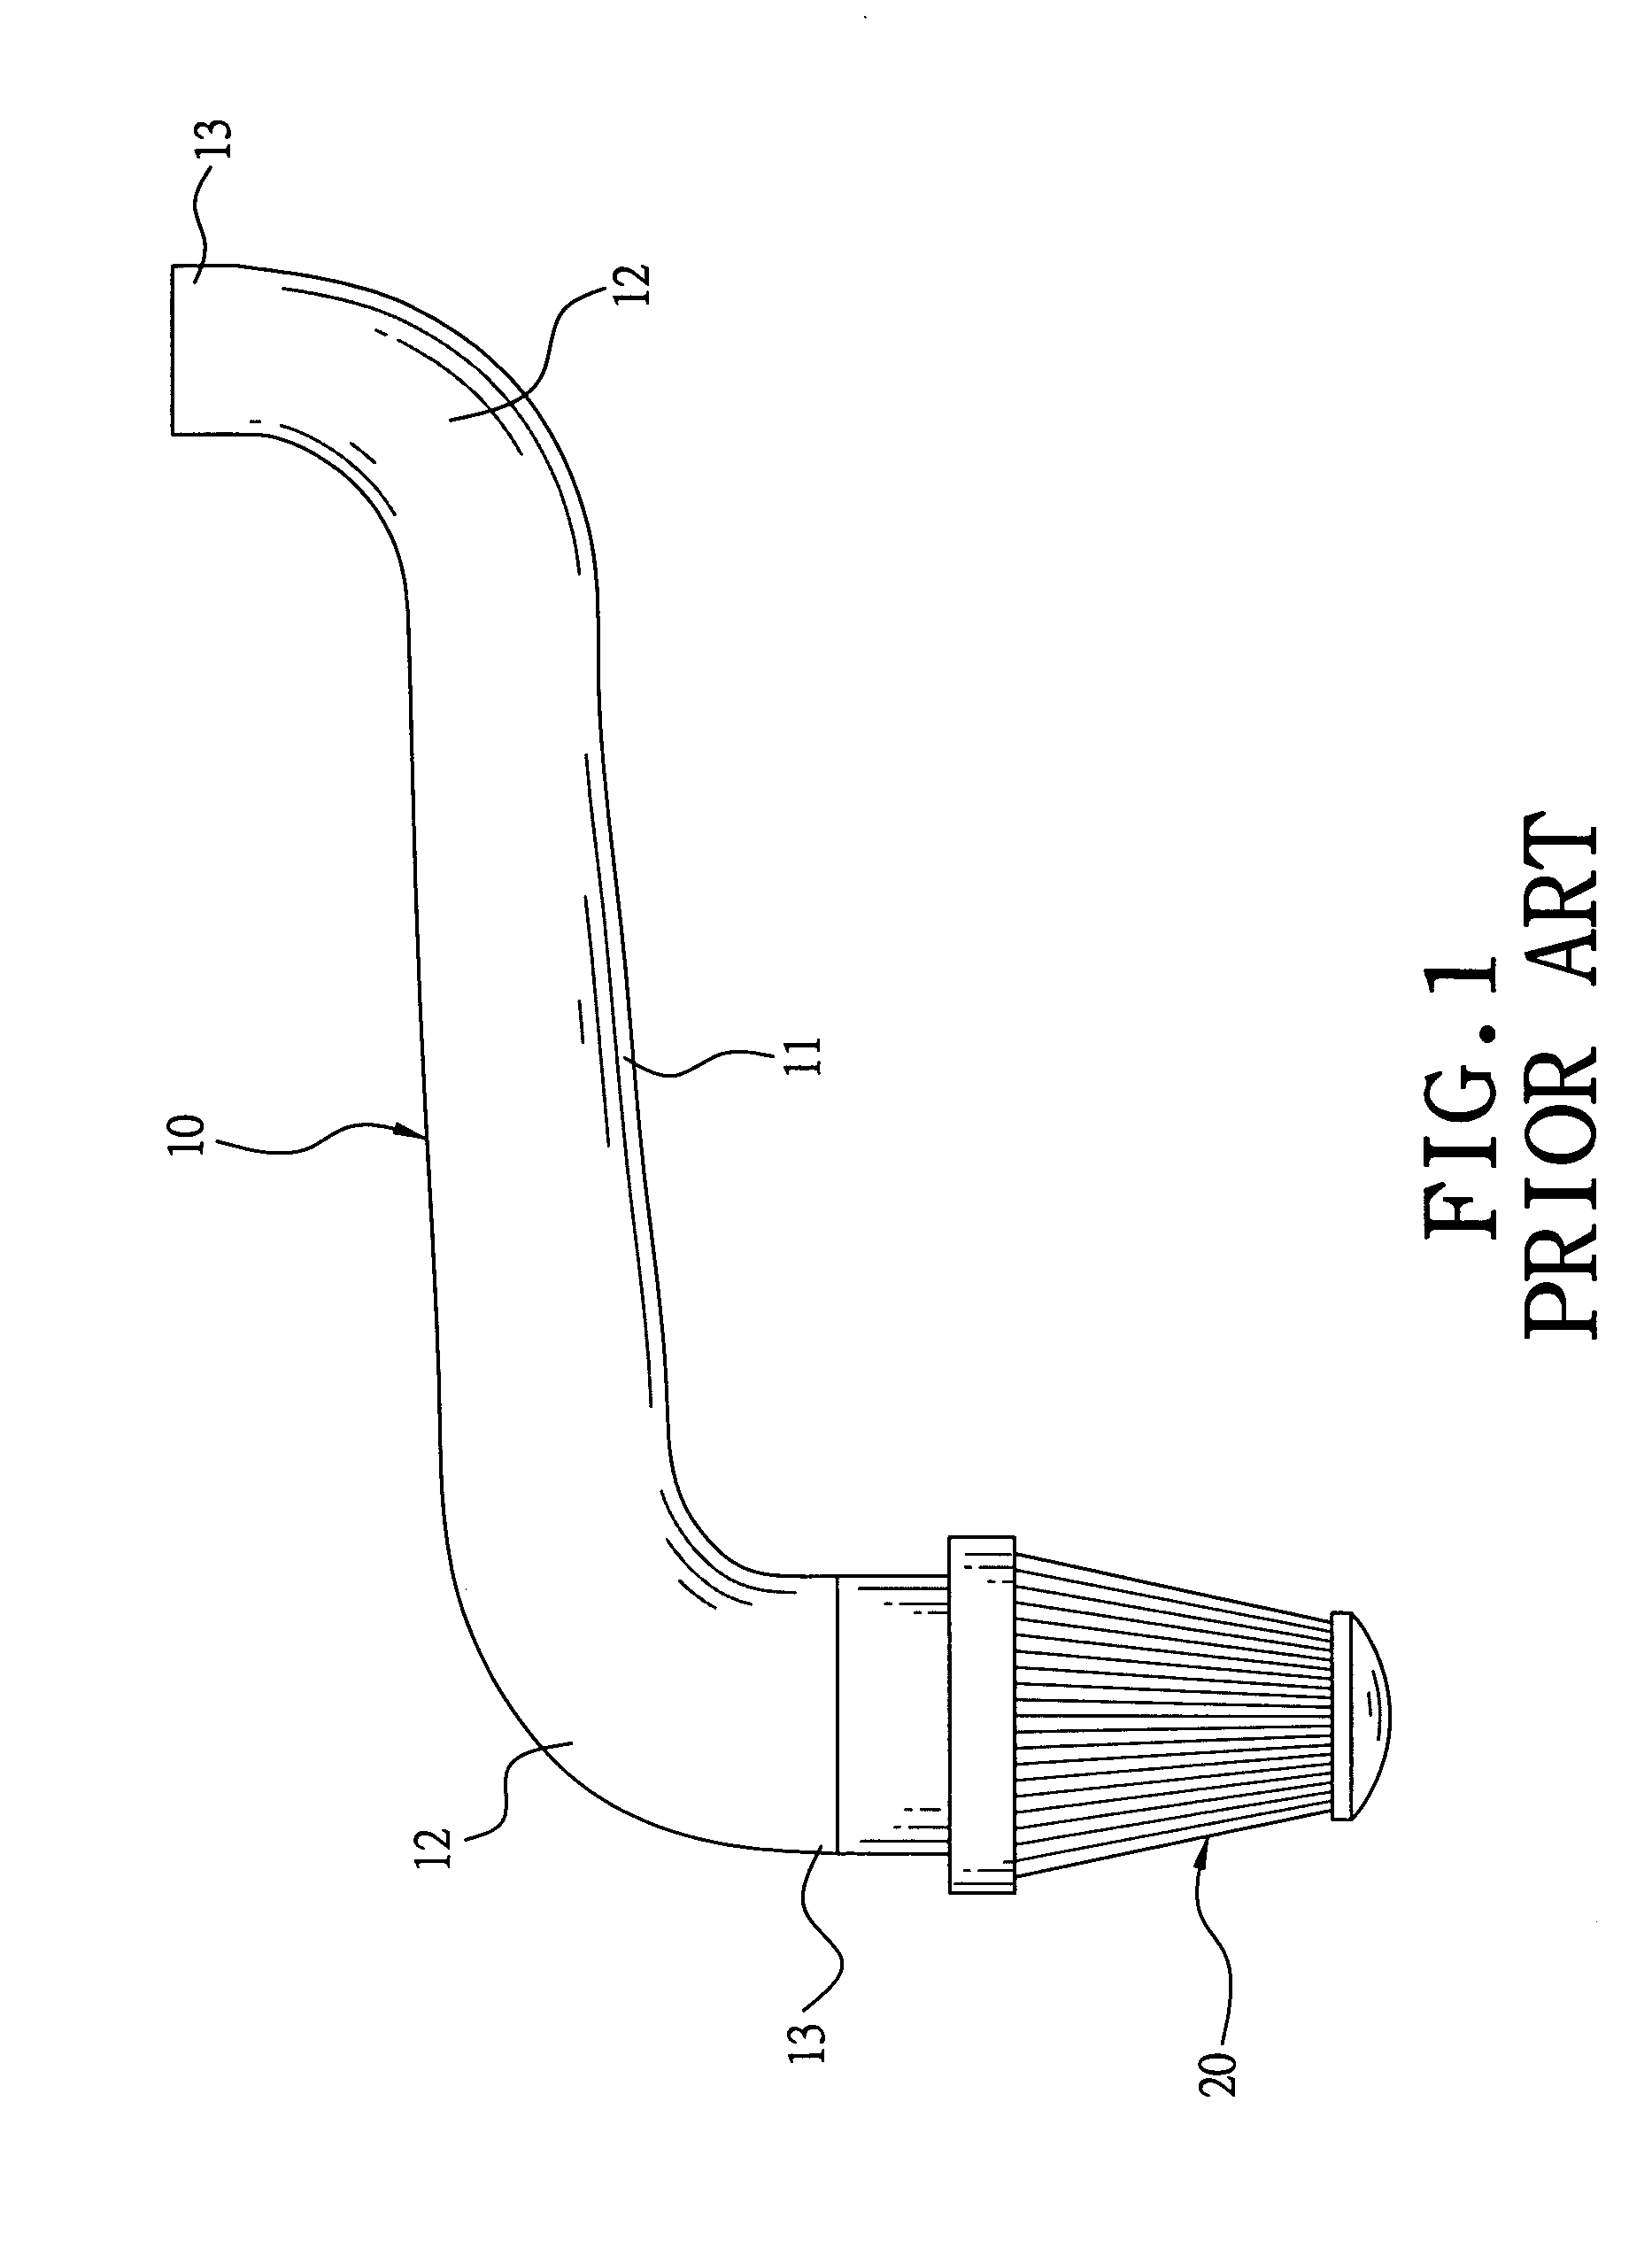 Air intake pipe able to increase intake of air and bendable freely for assembly